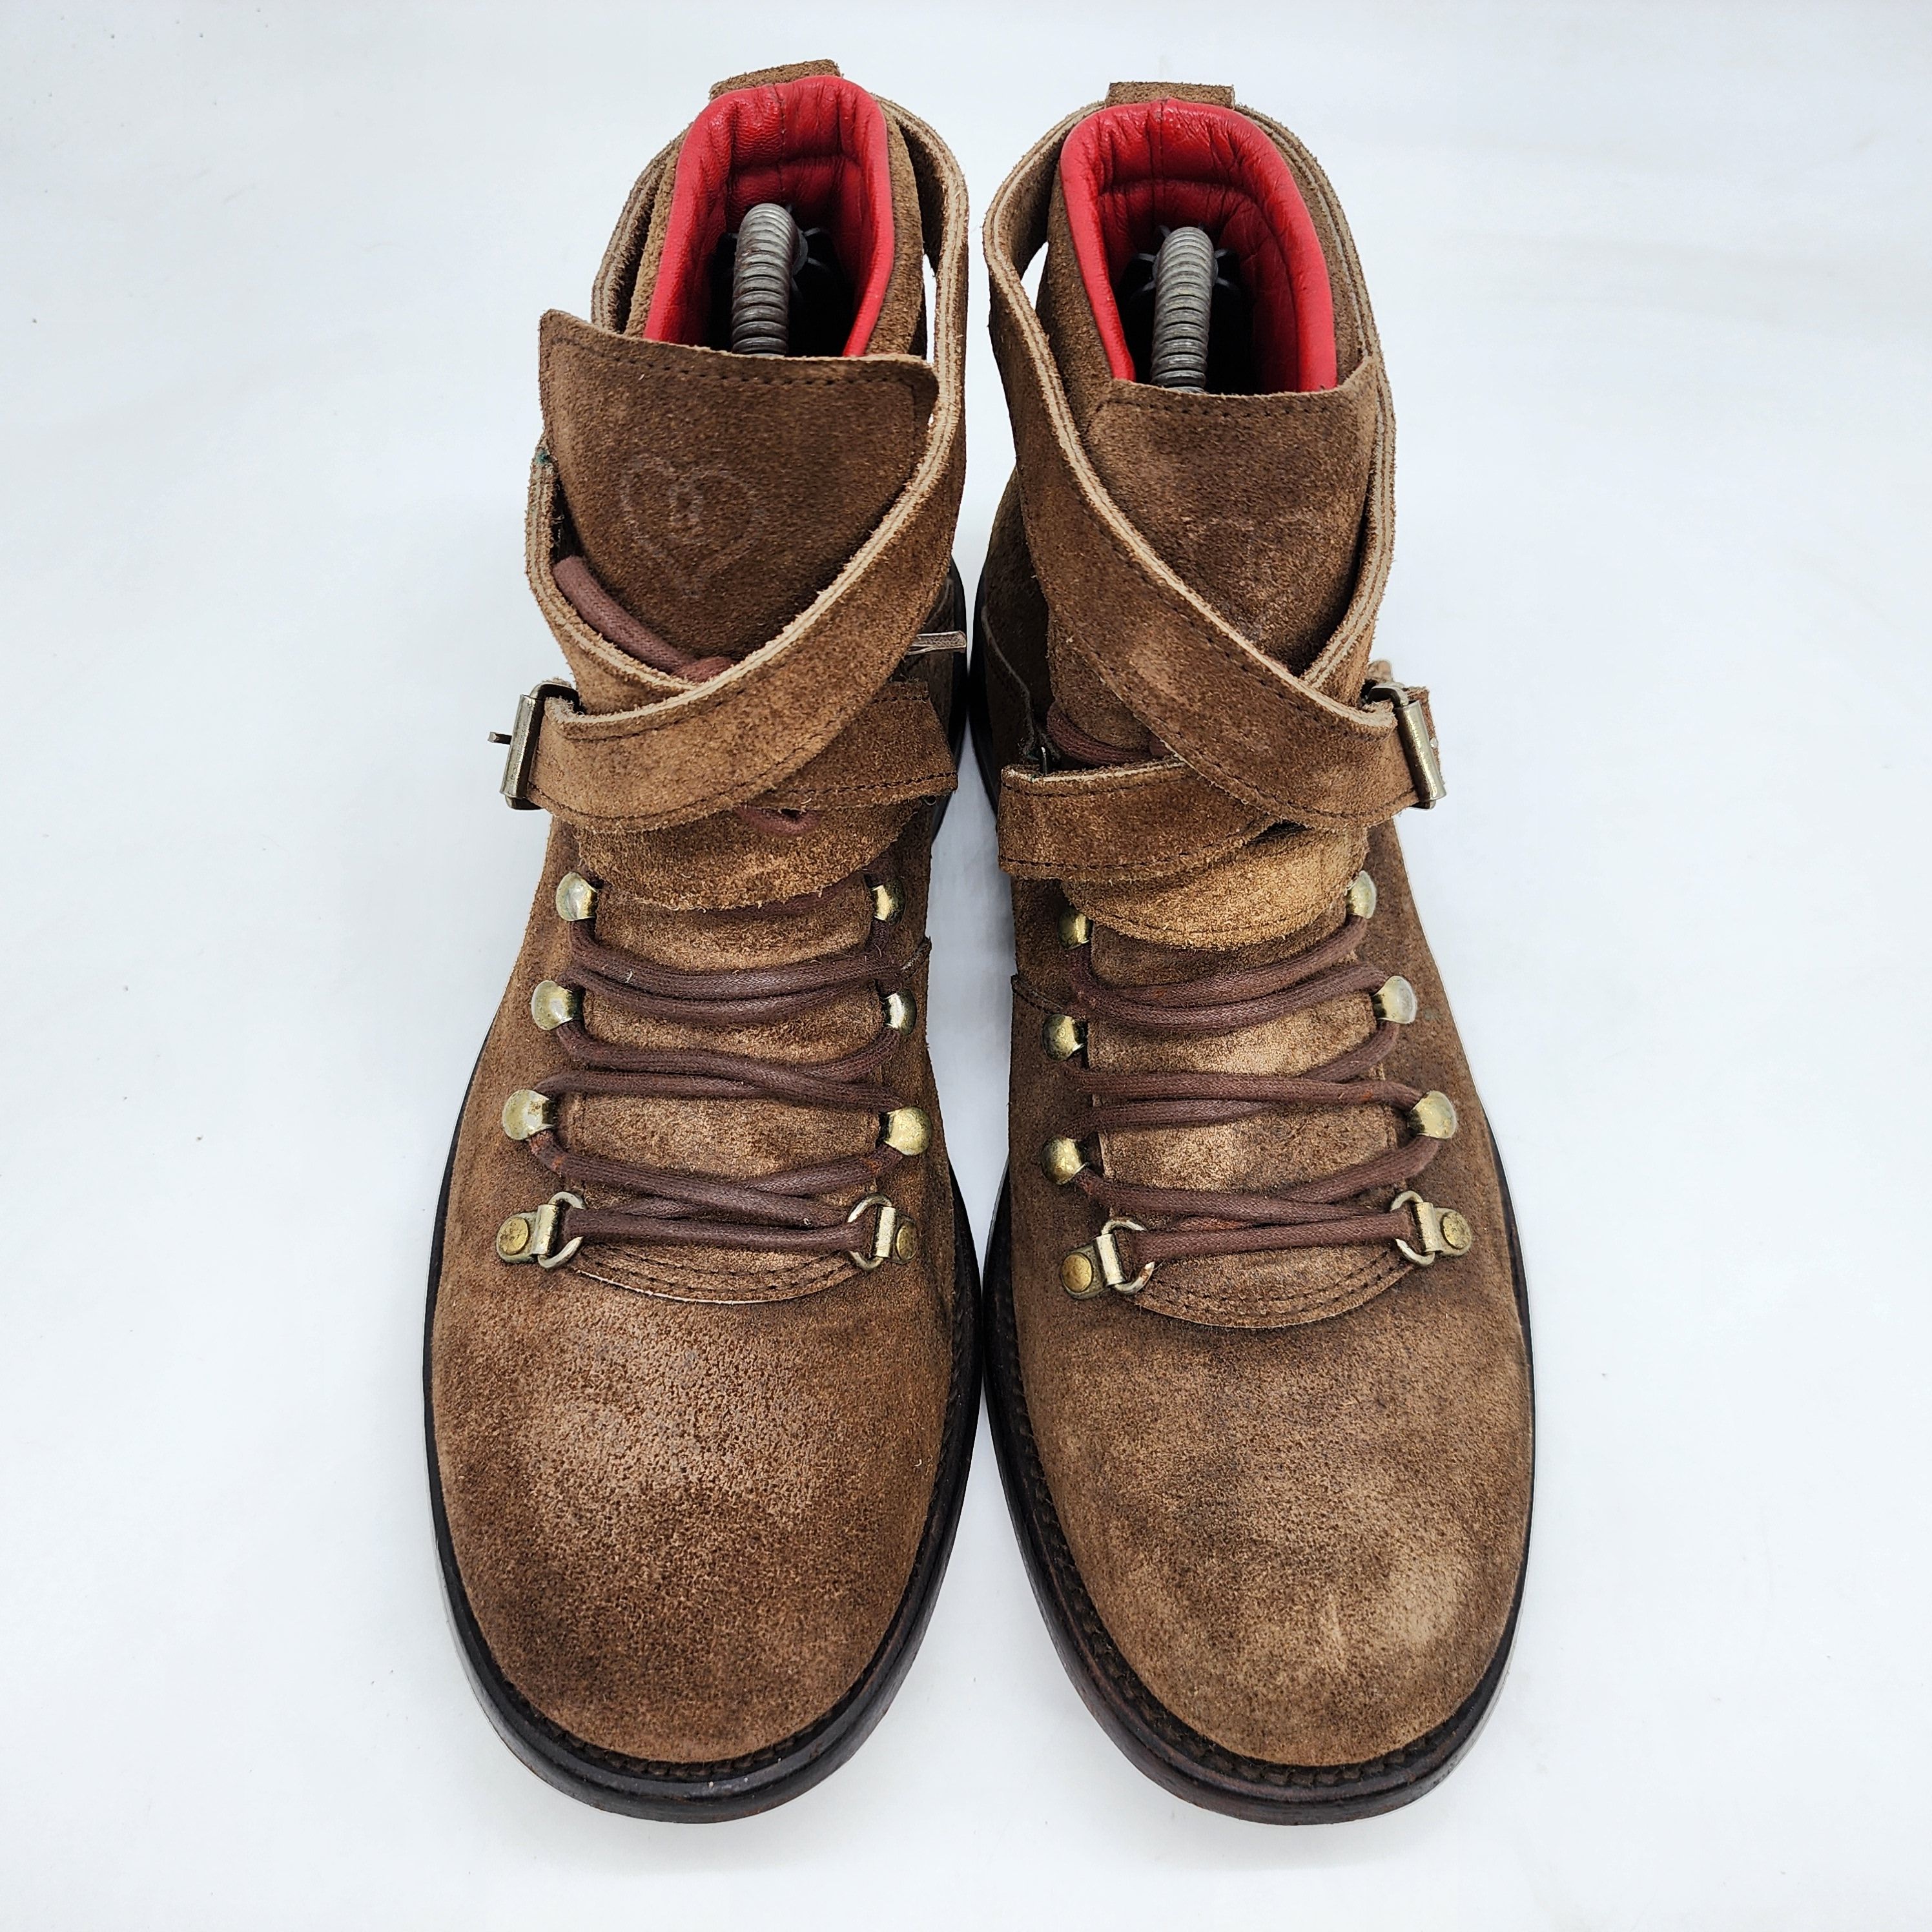 Archival Clothing - Jean Baptiste Rautureau - Archival Strap Hiking Boot - 3